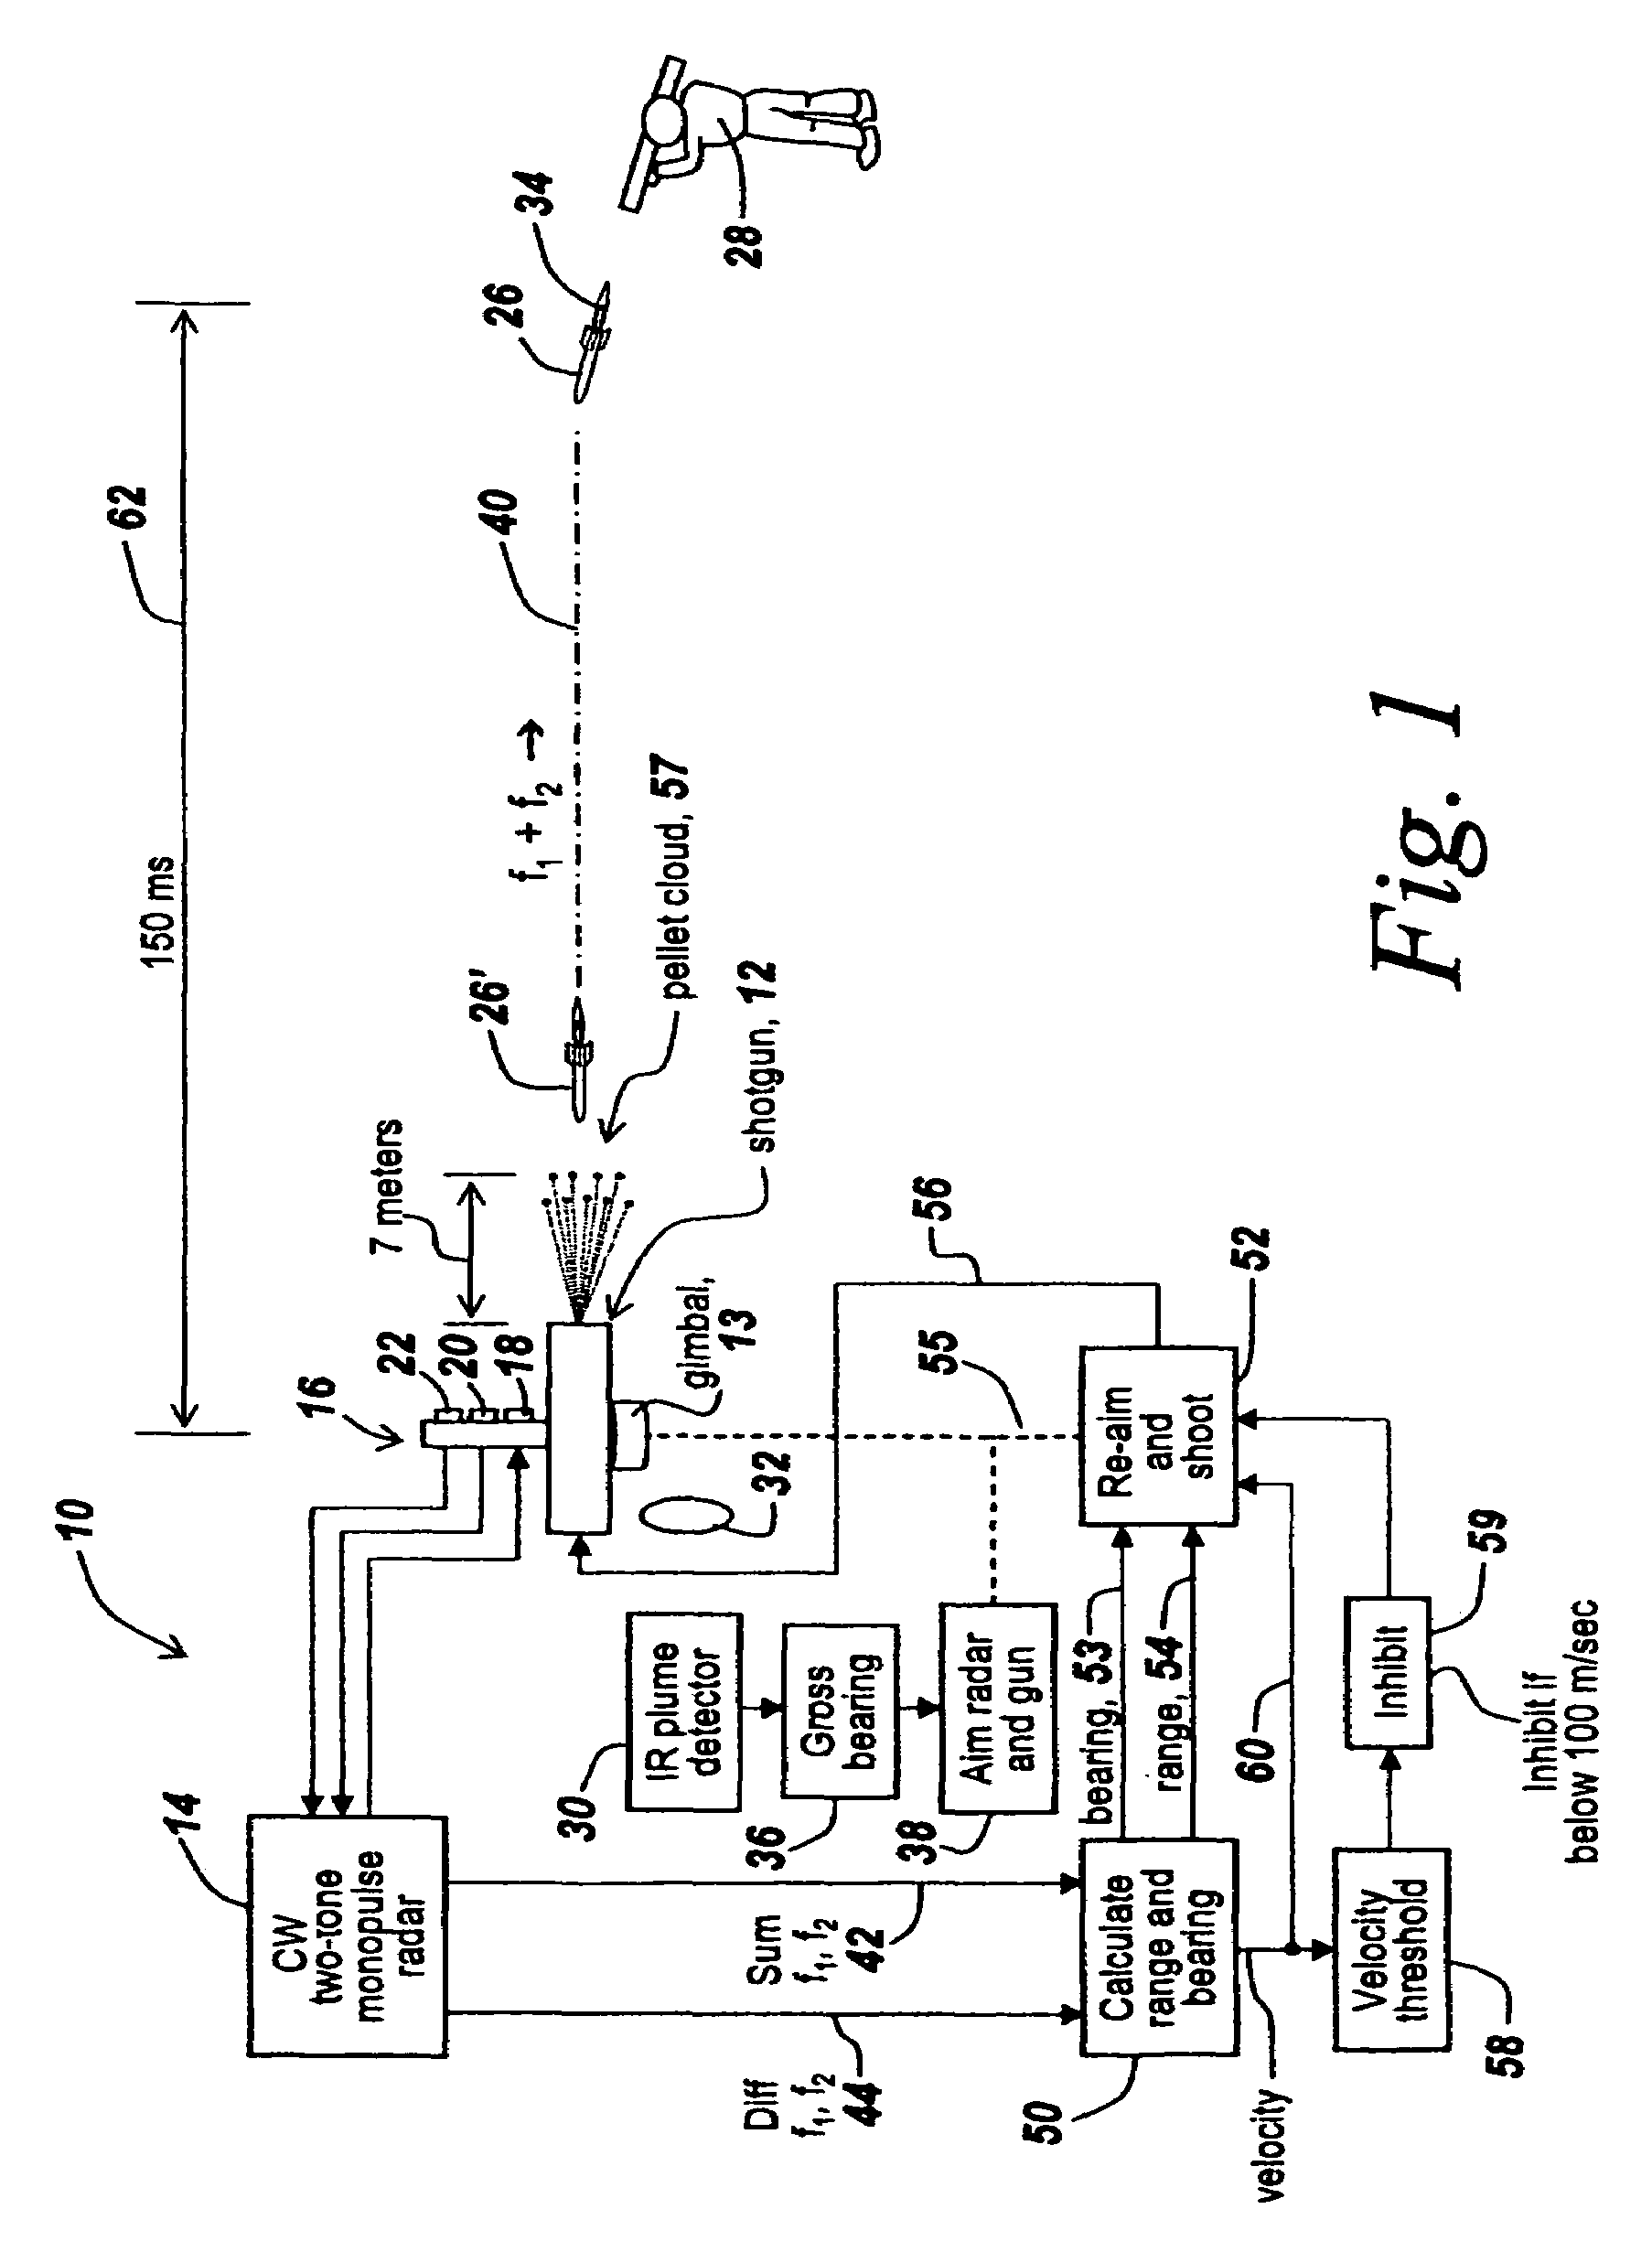 Method and apparatus for improved determination of range and angle of arrival utilizing a two tone CW radar